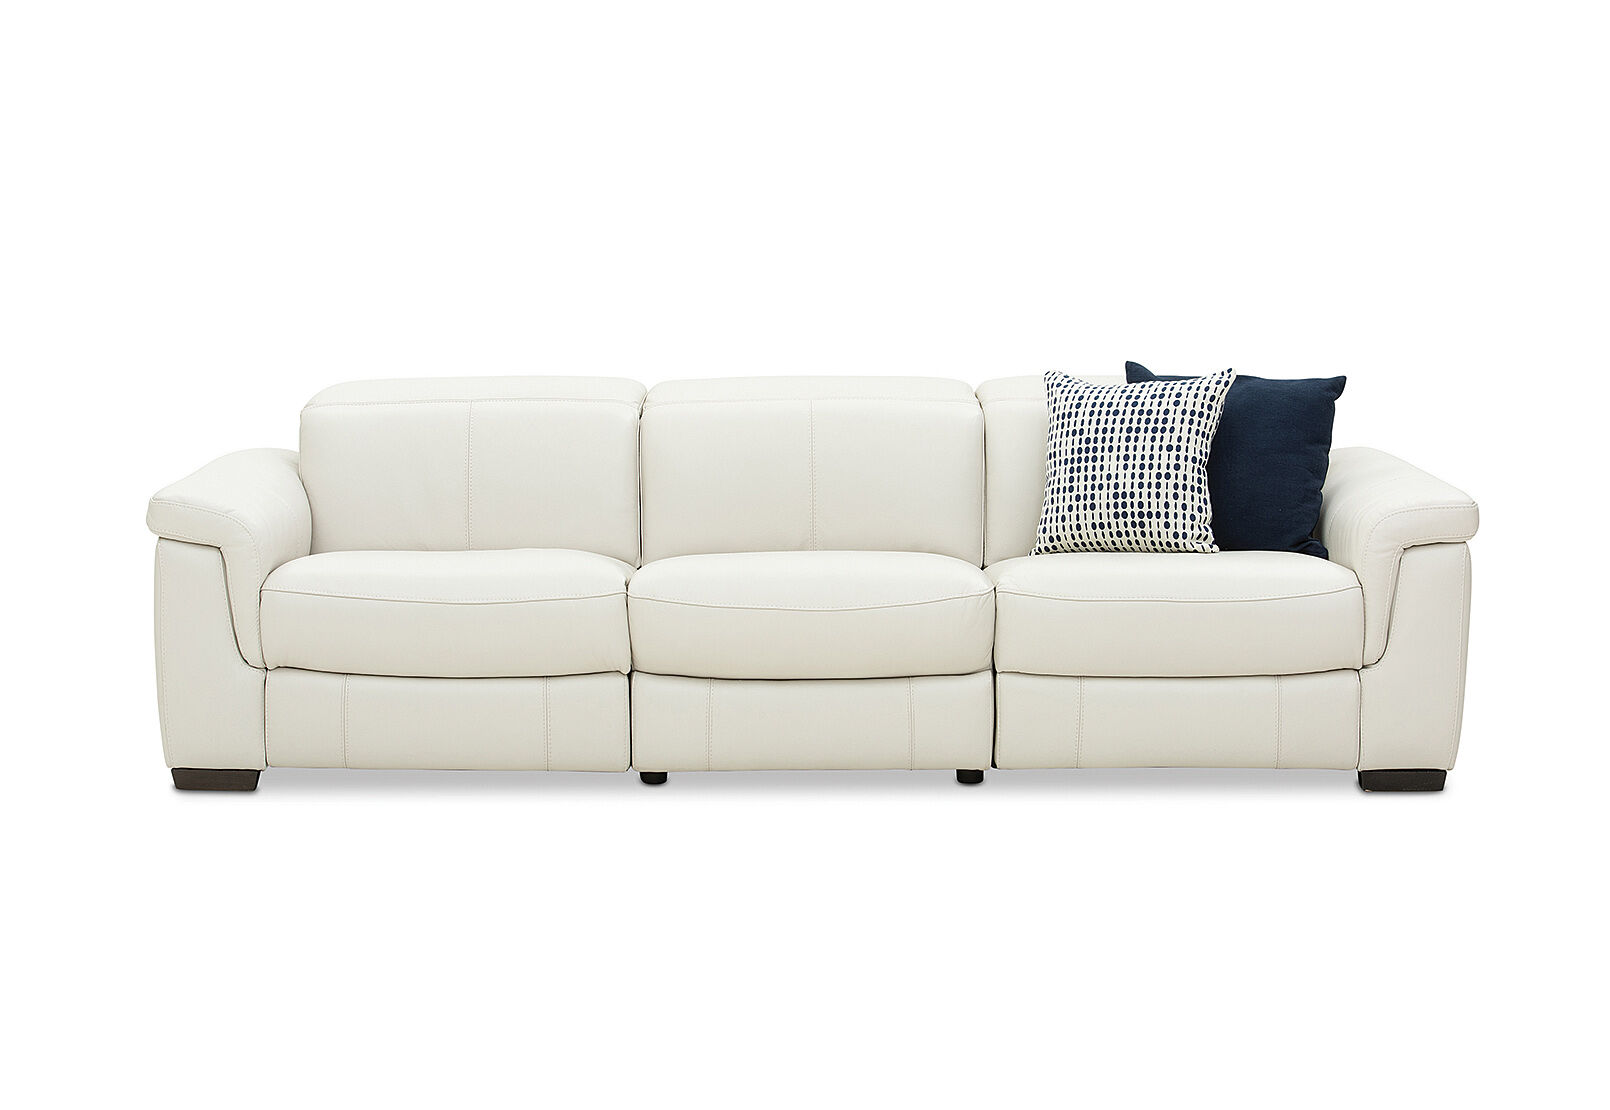 Luciano Leather 3.5 Seater Sofa with 2 Electric Recliners